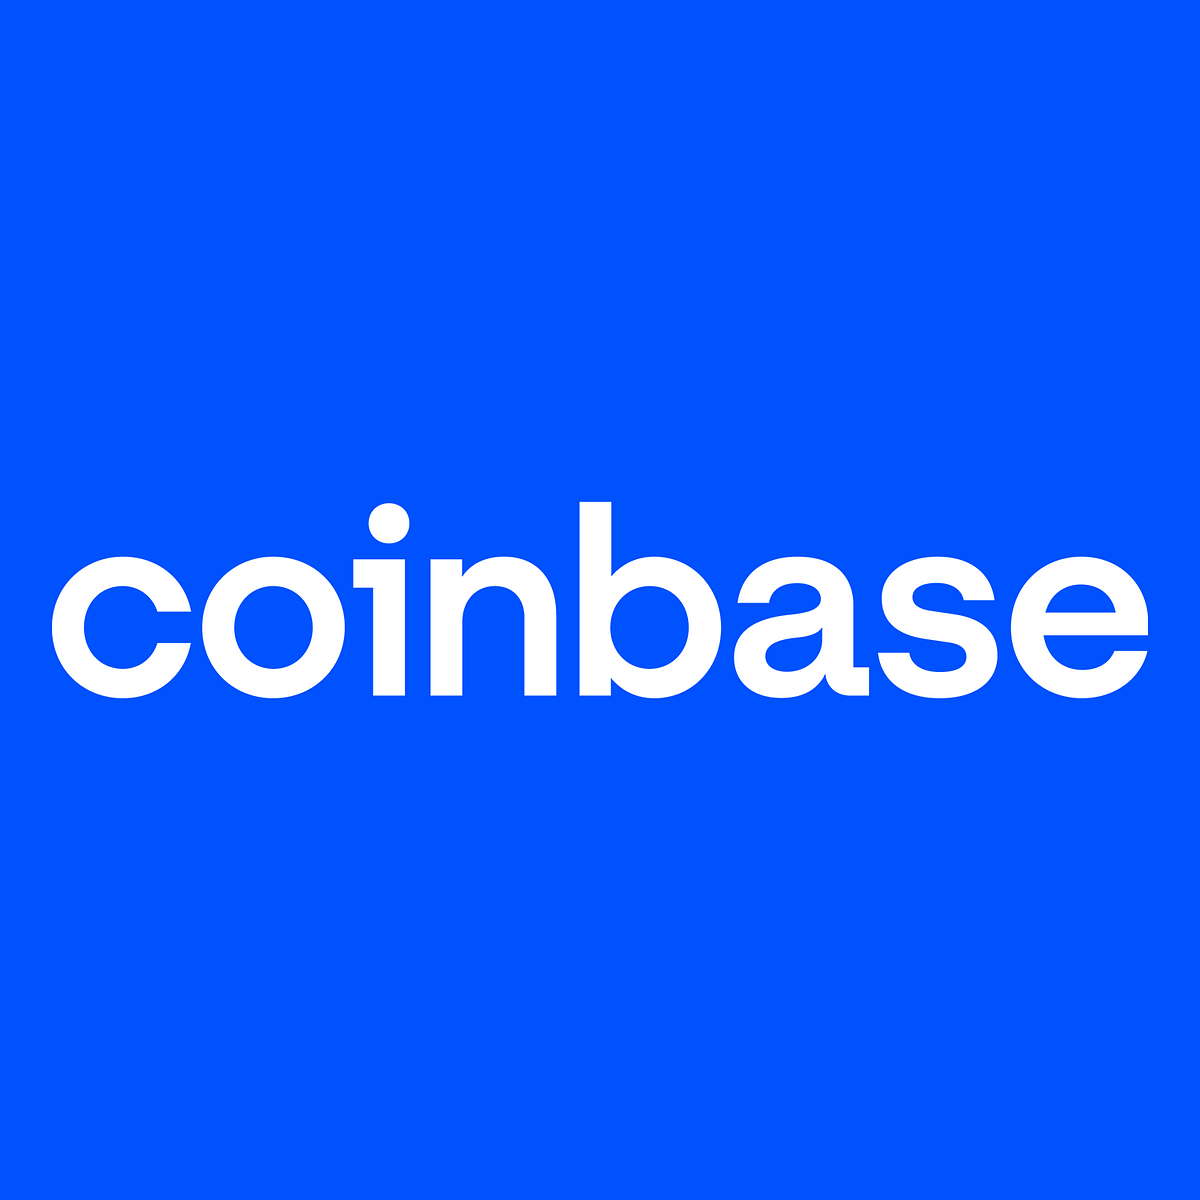 Latest stories published on The Coinbase Blog